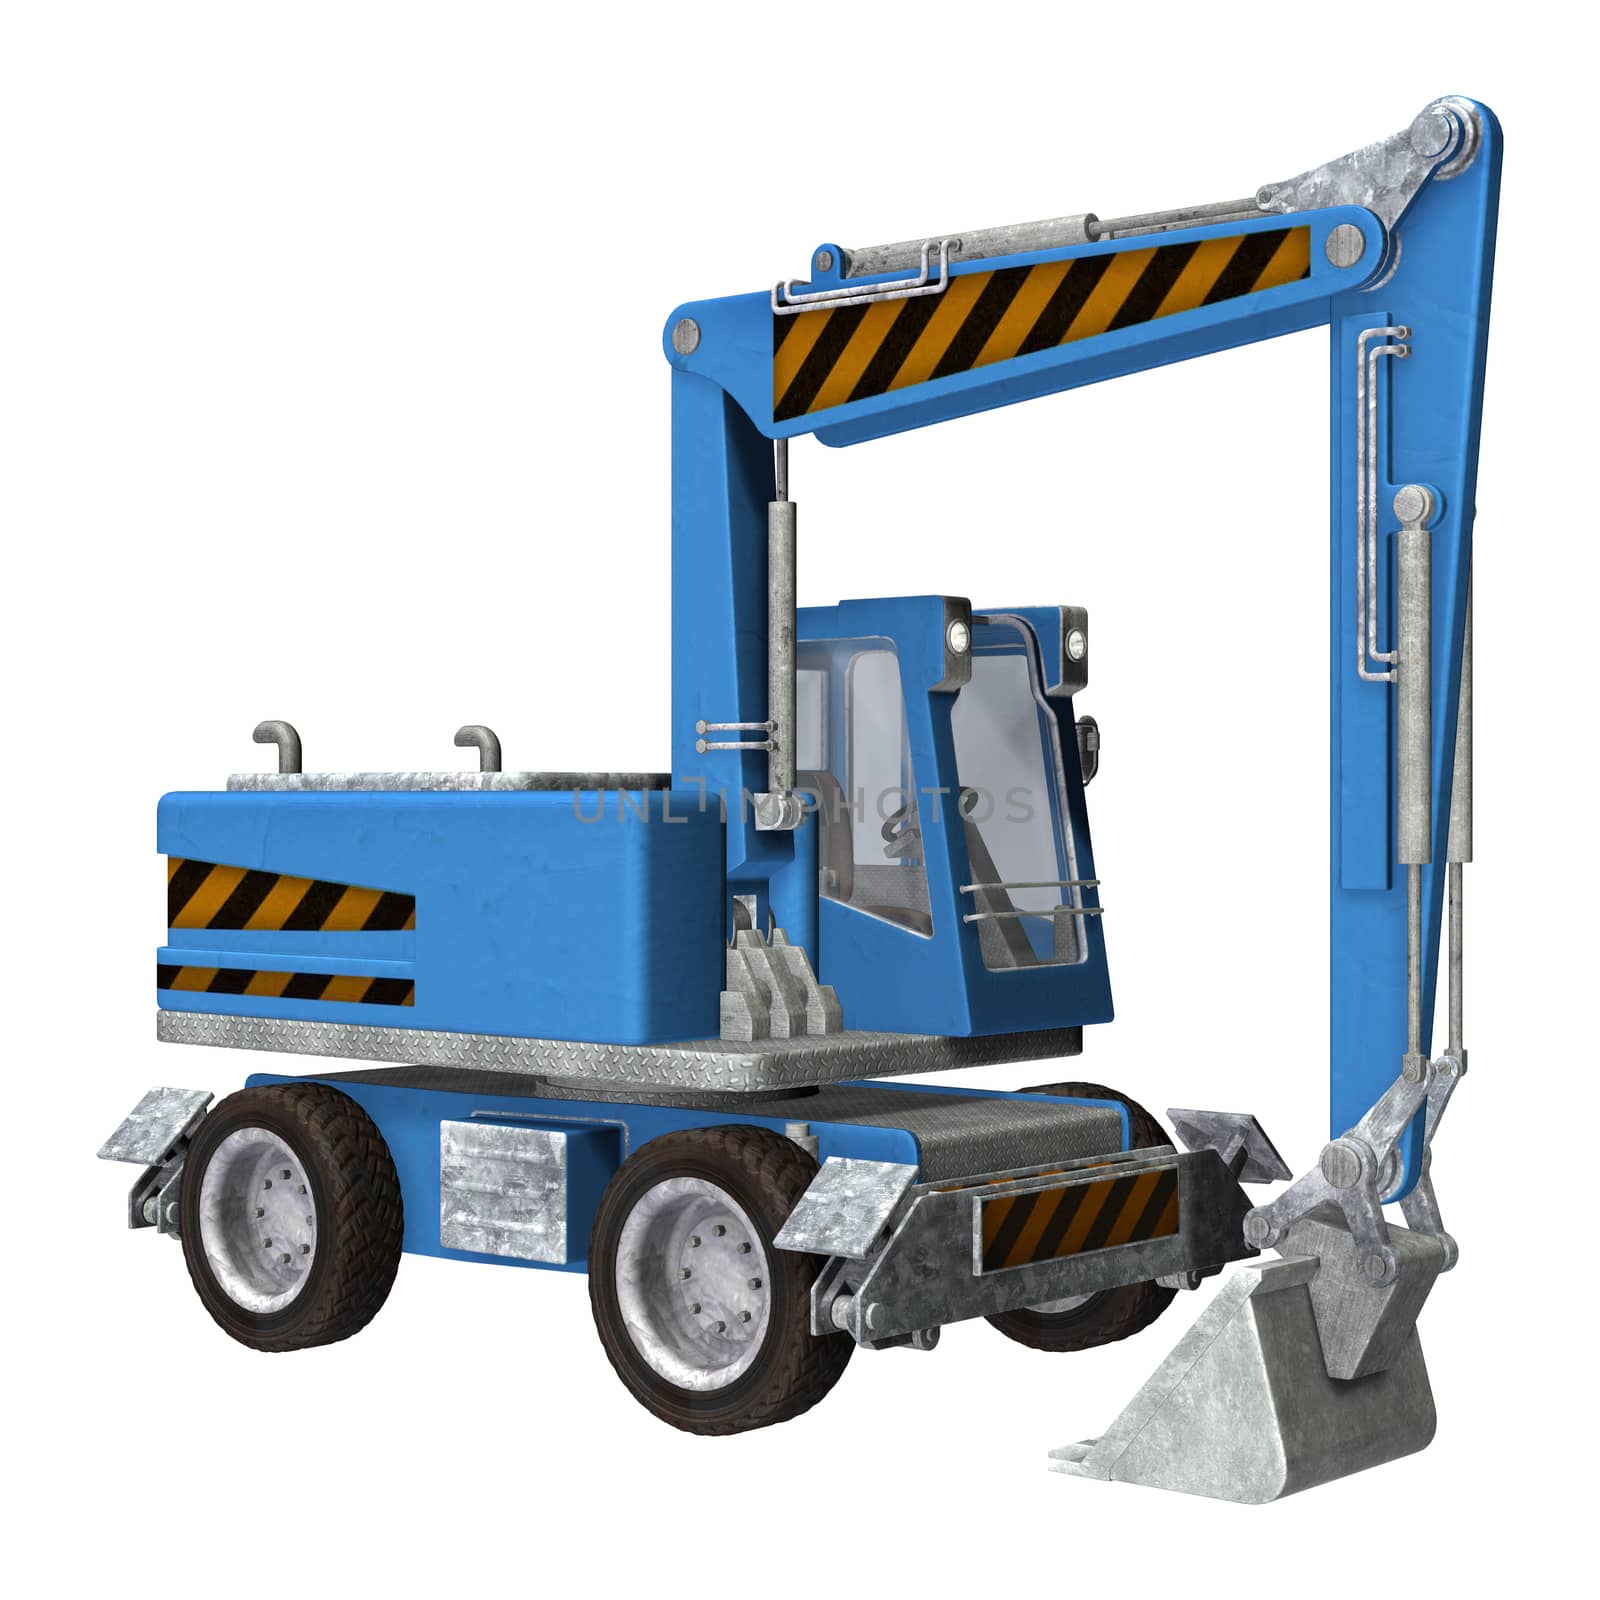 3D digital render of a blue wheel excavator isolated on white background